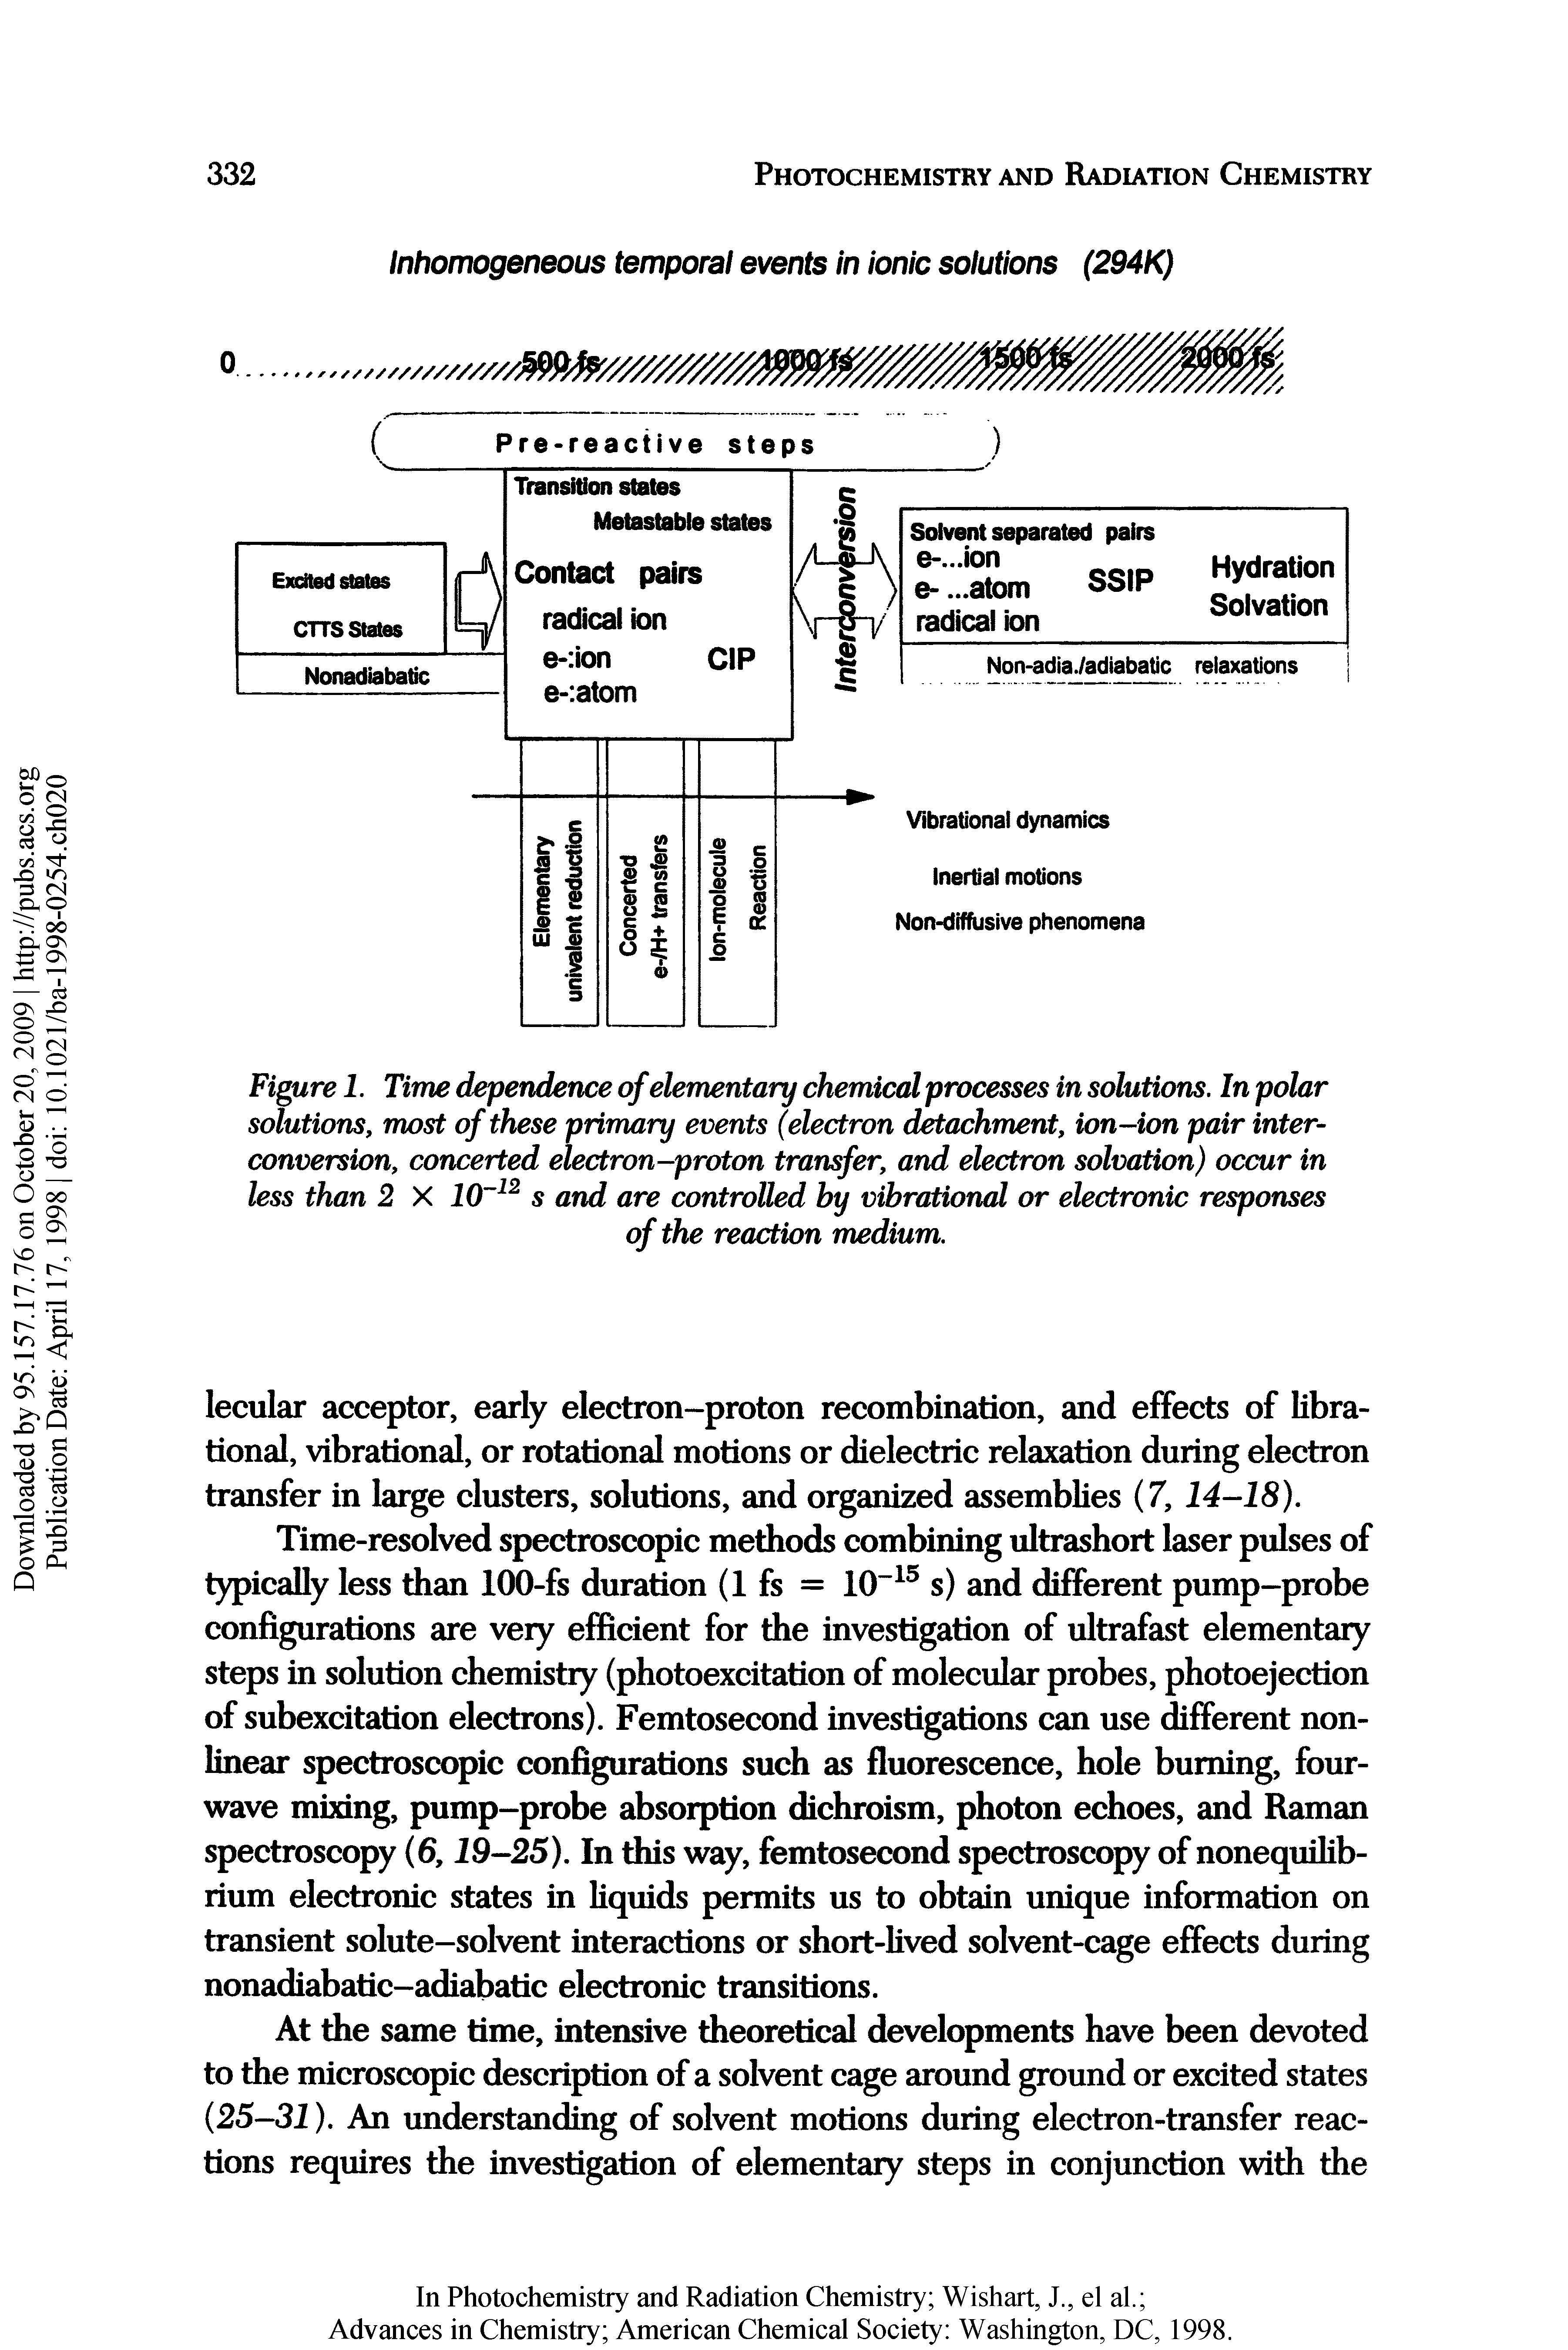 Figure 1. Time dependence of elementary chemical processes in solutions. In polar solutions, most of these primary events (electron detachment, ion-ion pair inter-conversion, concerted electron-proton transfer, and electron solvation) occur in less than 2 X 1Q s and are controlled by vibrational or electronic responses of the reaction medium.